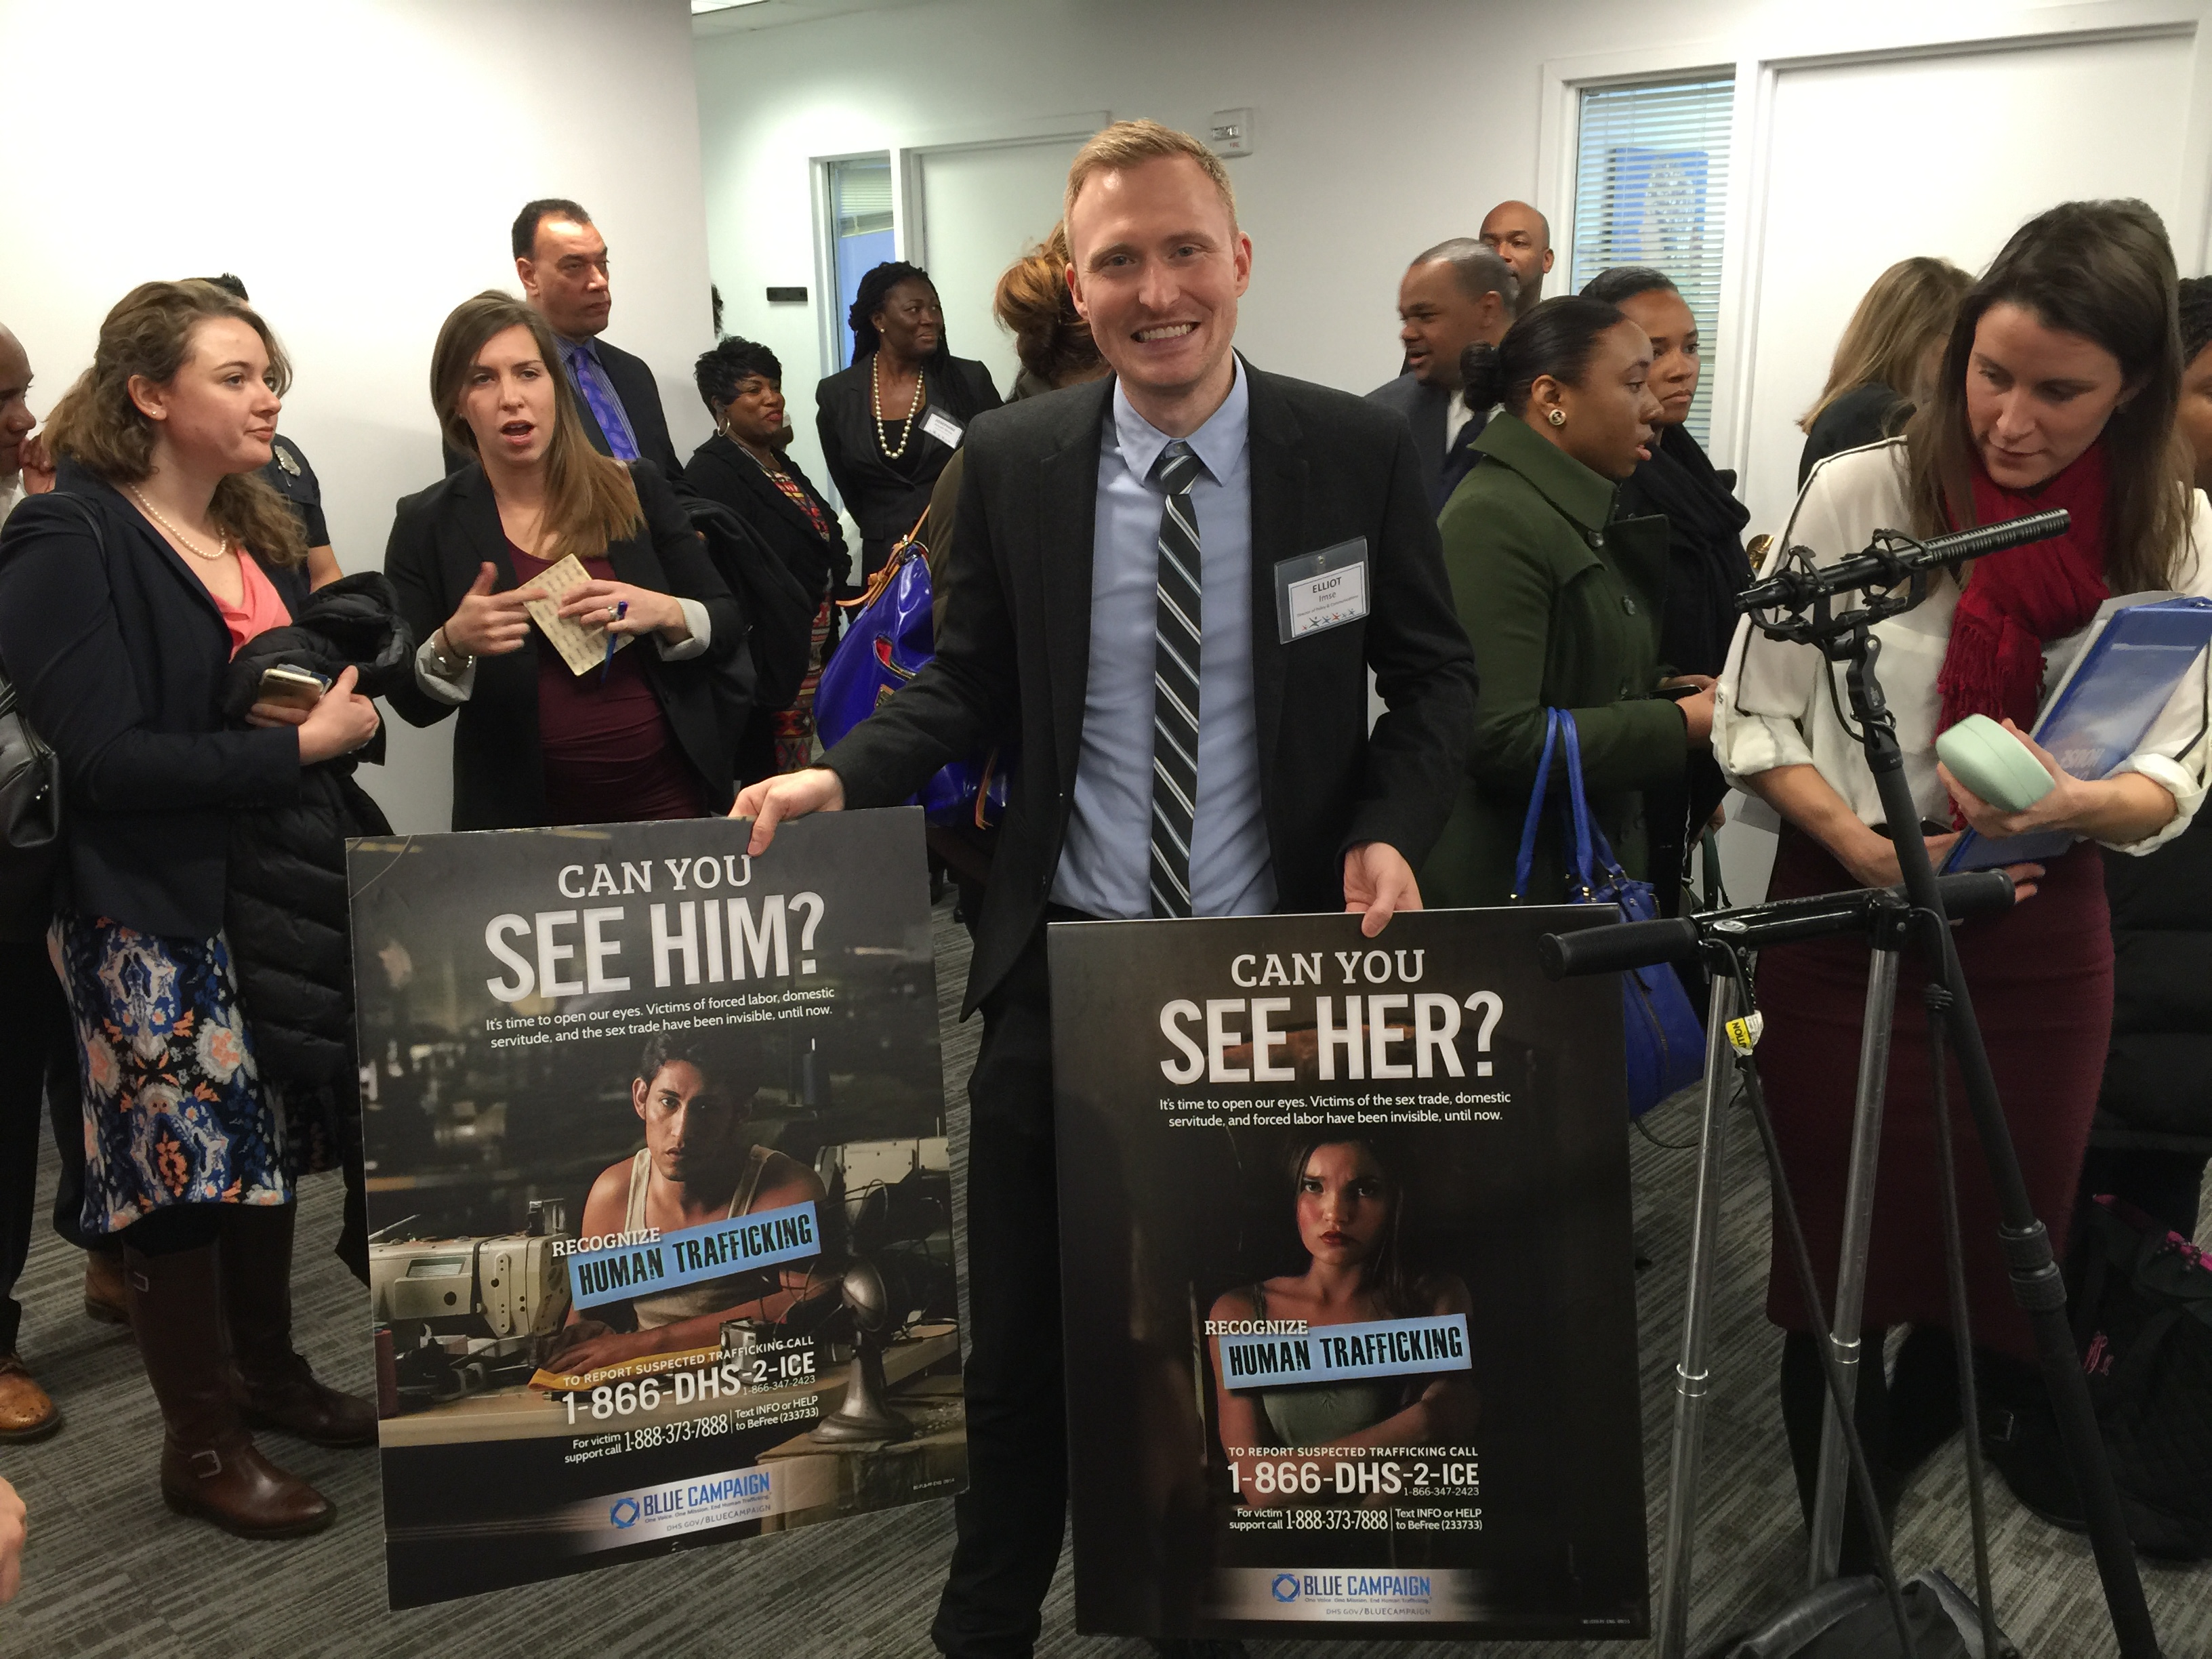 D.C. joins campaign to curtail human trafficking